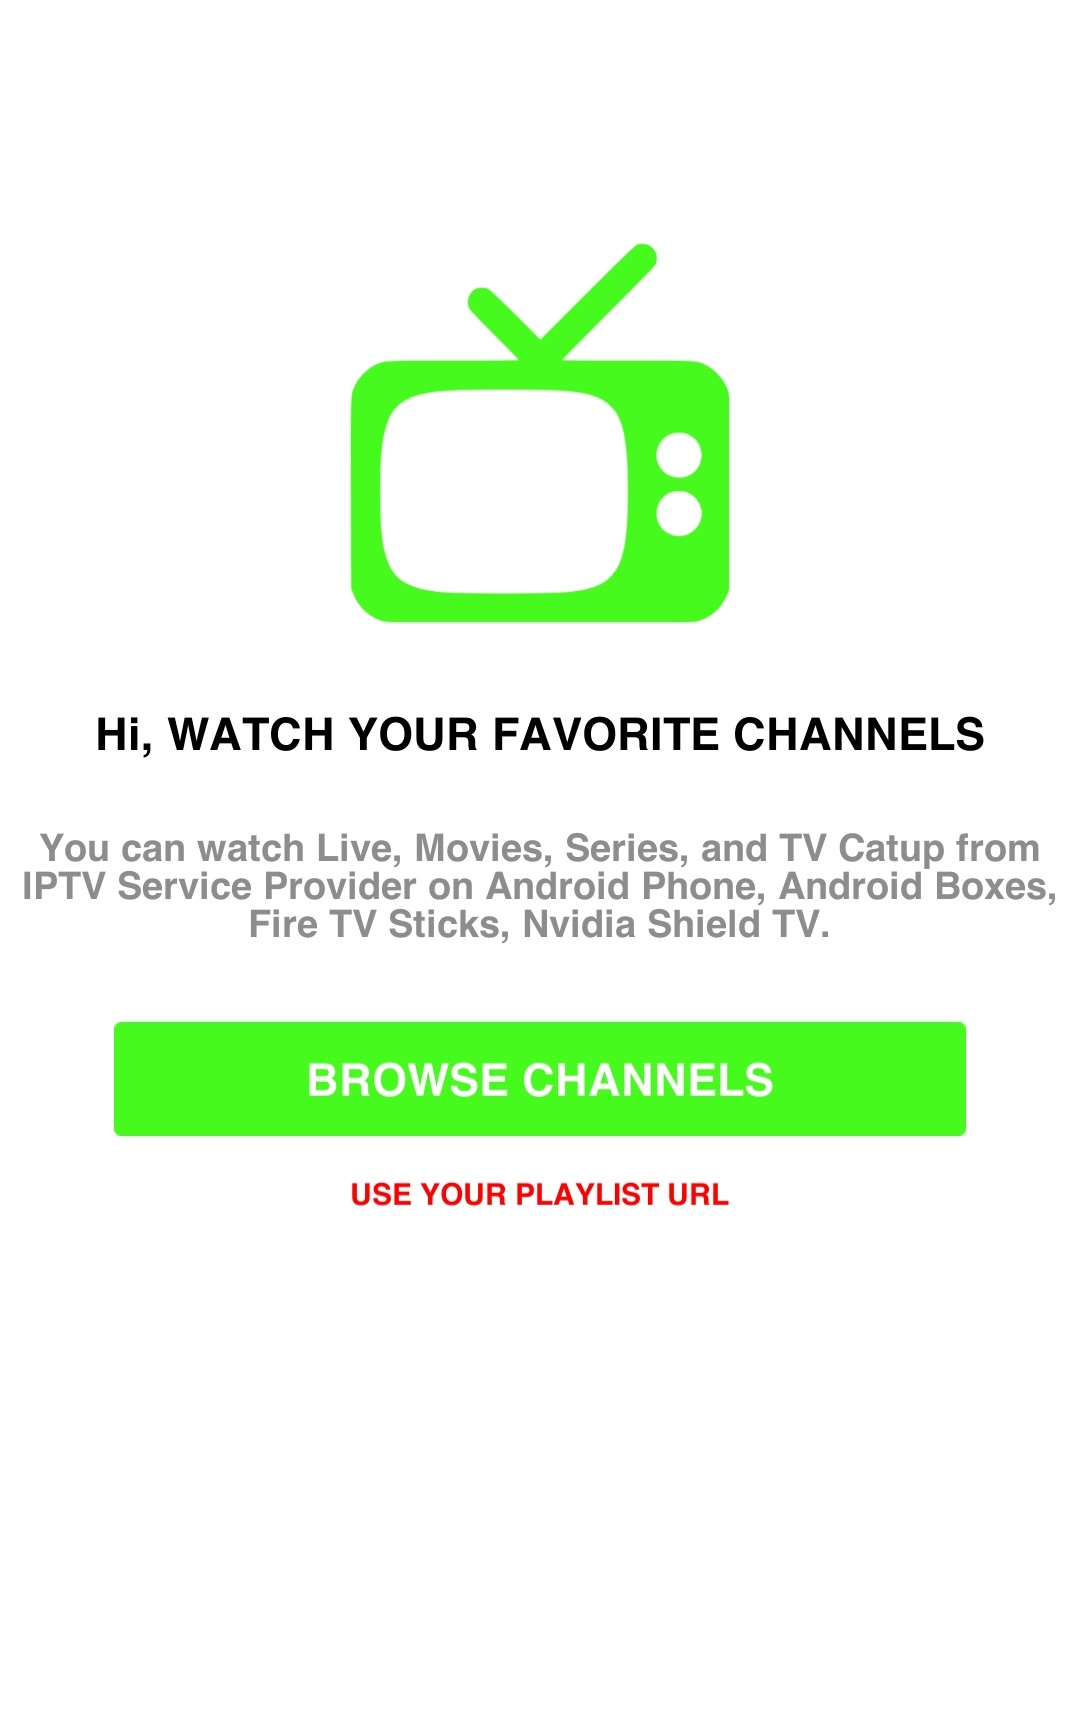 Select Use Your Playlist URL to stream Hive IPTV